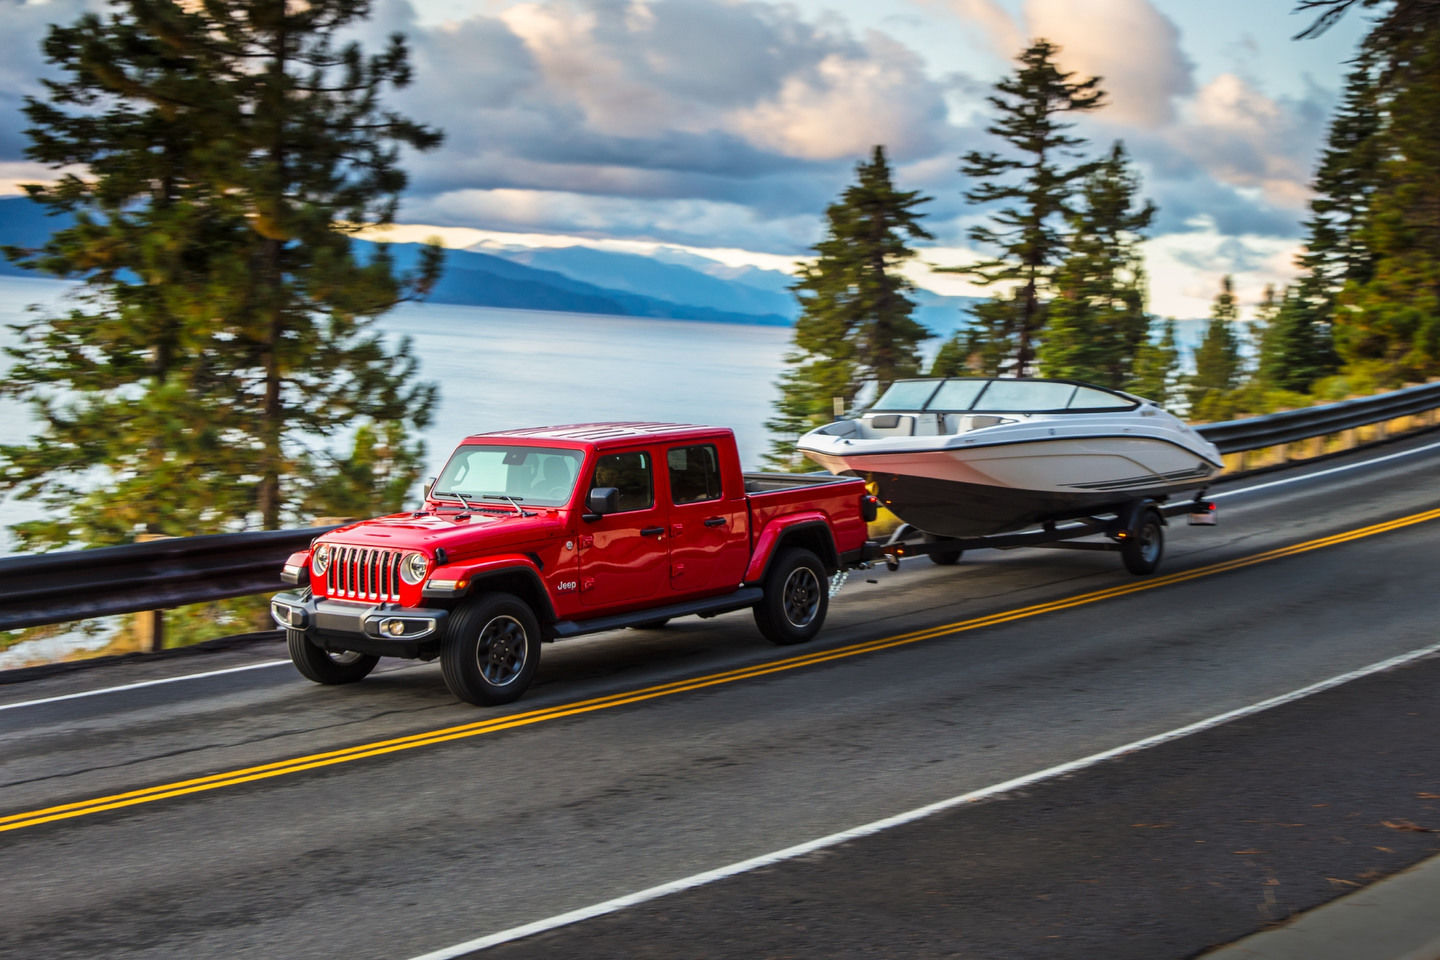 The 2022 Jeep lineup towing capability guide